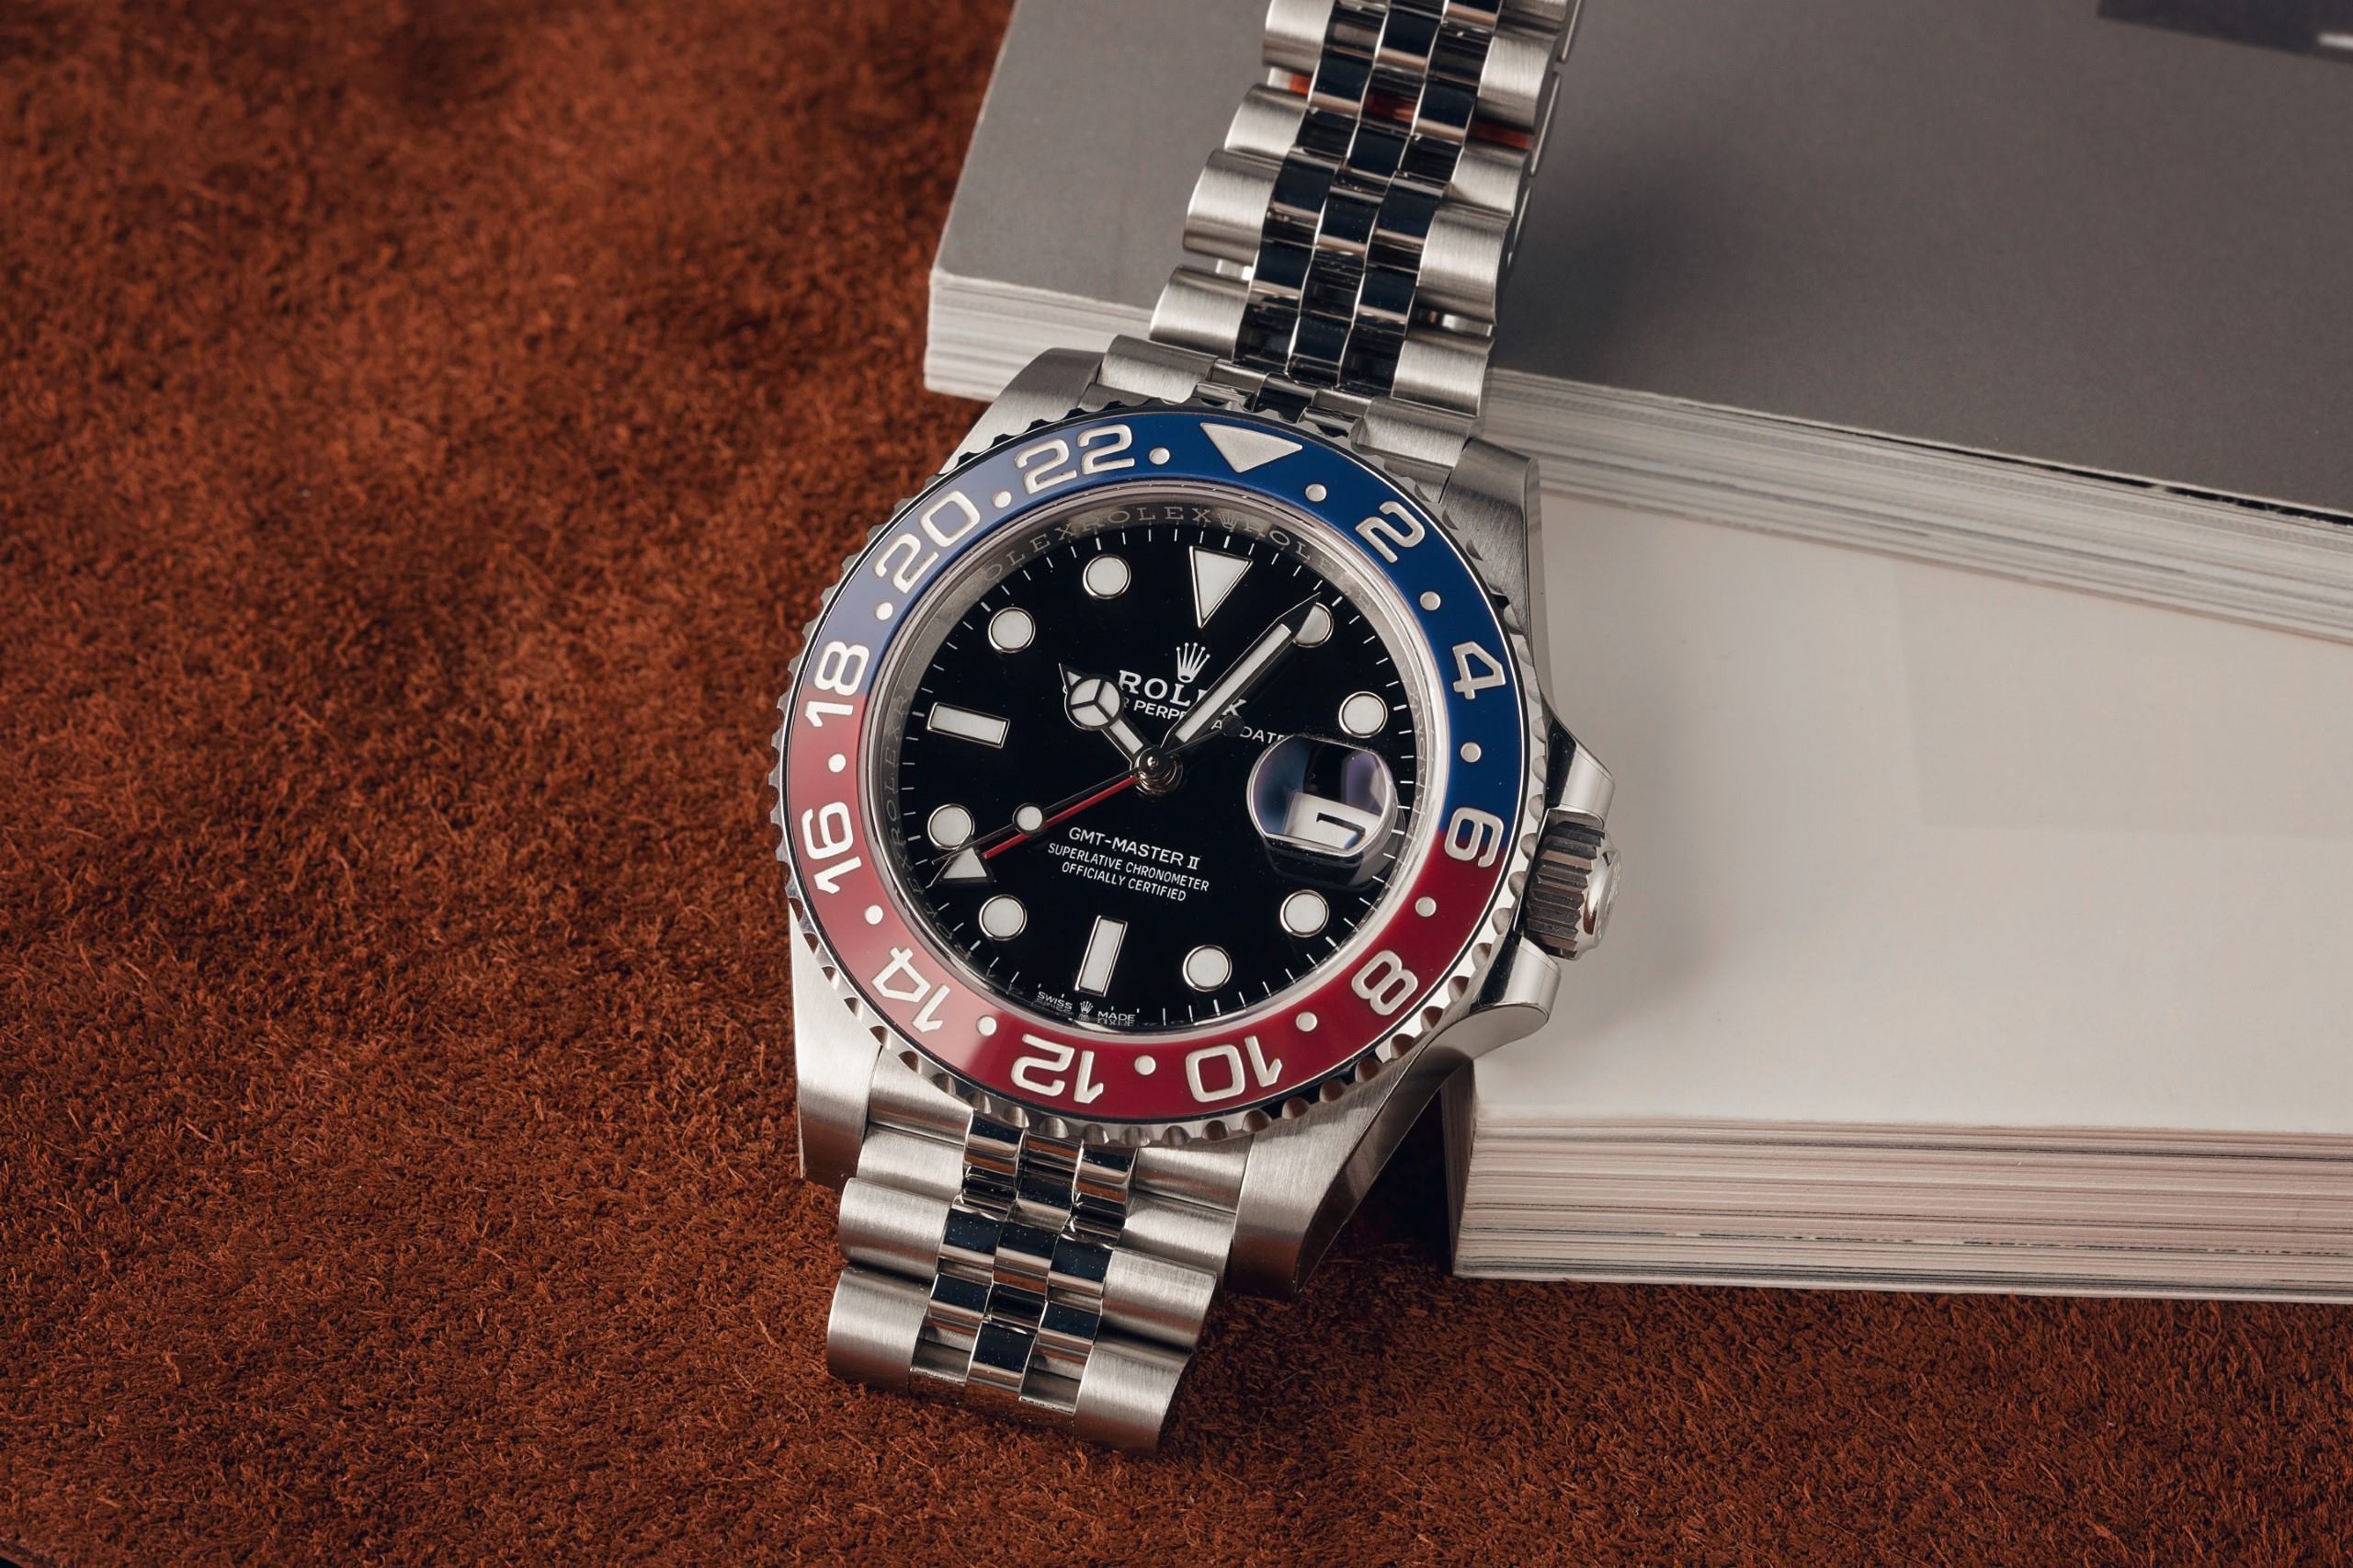 Sell Your Rolex Online